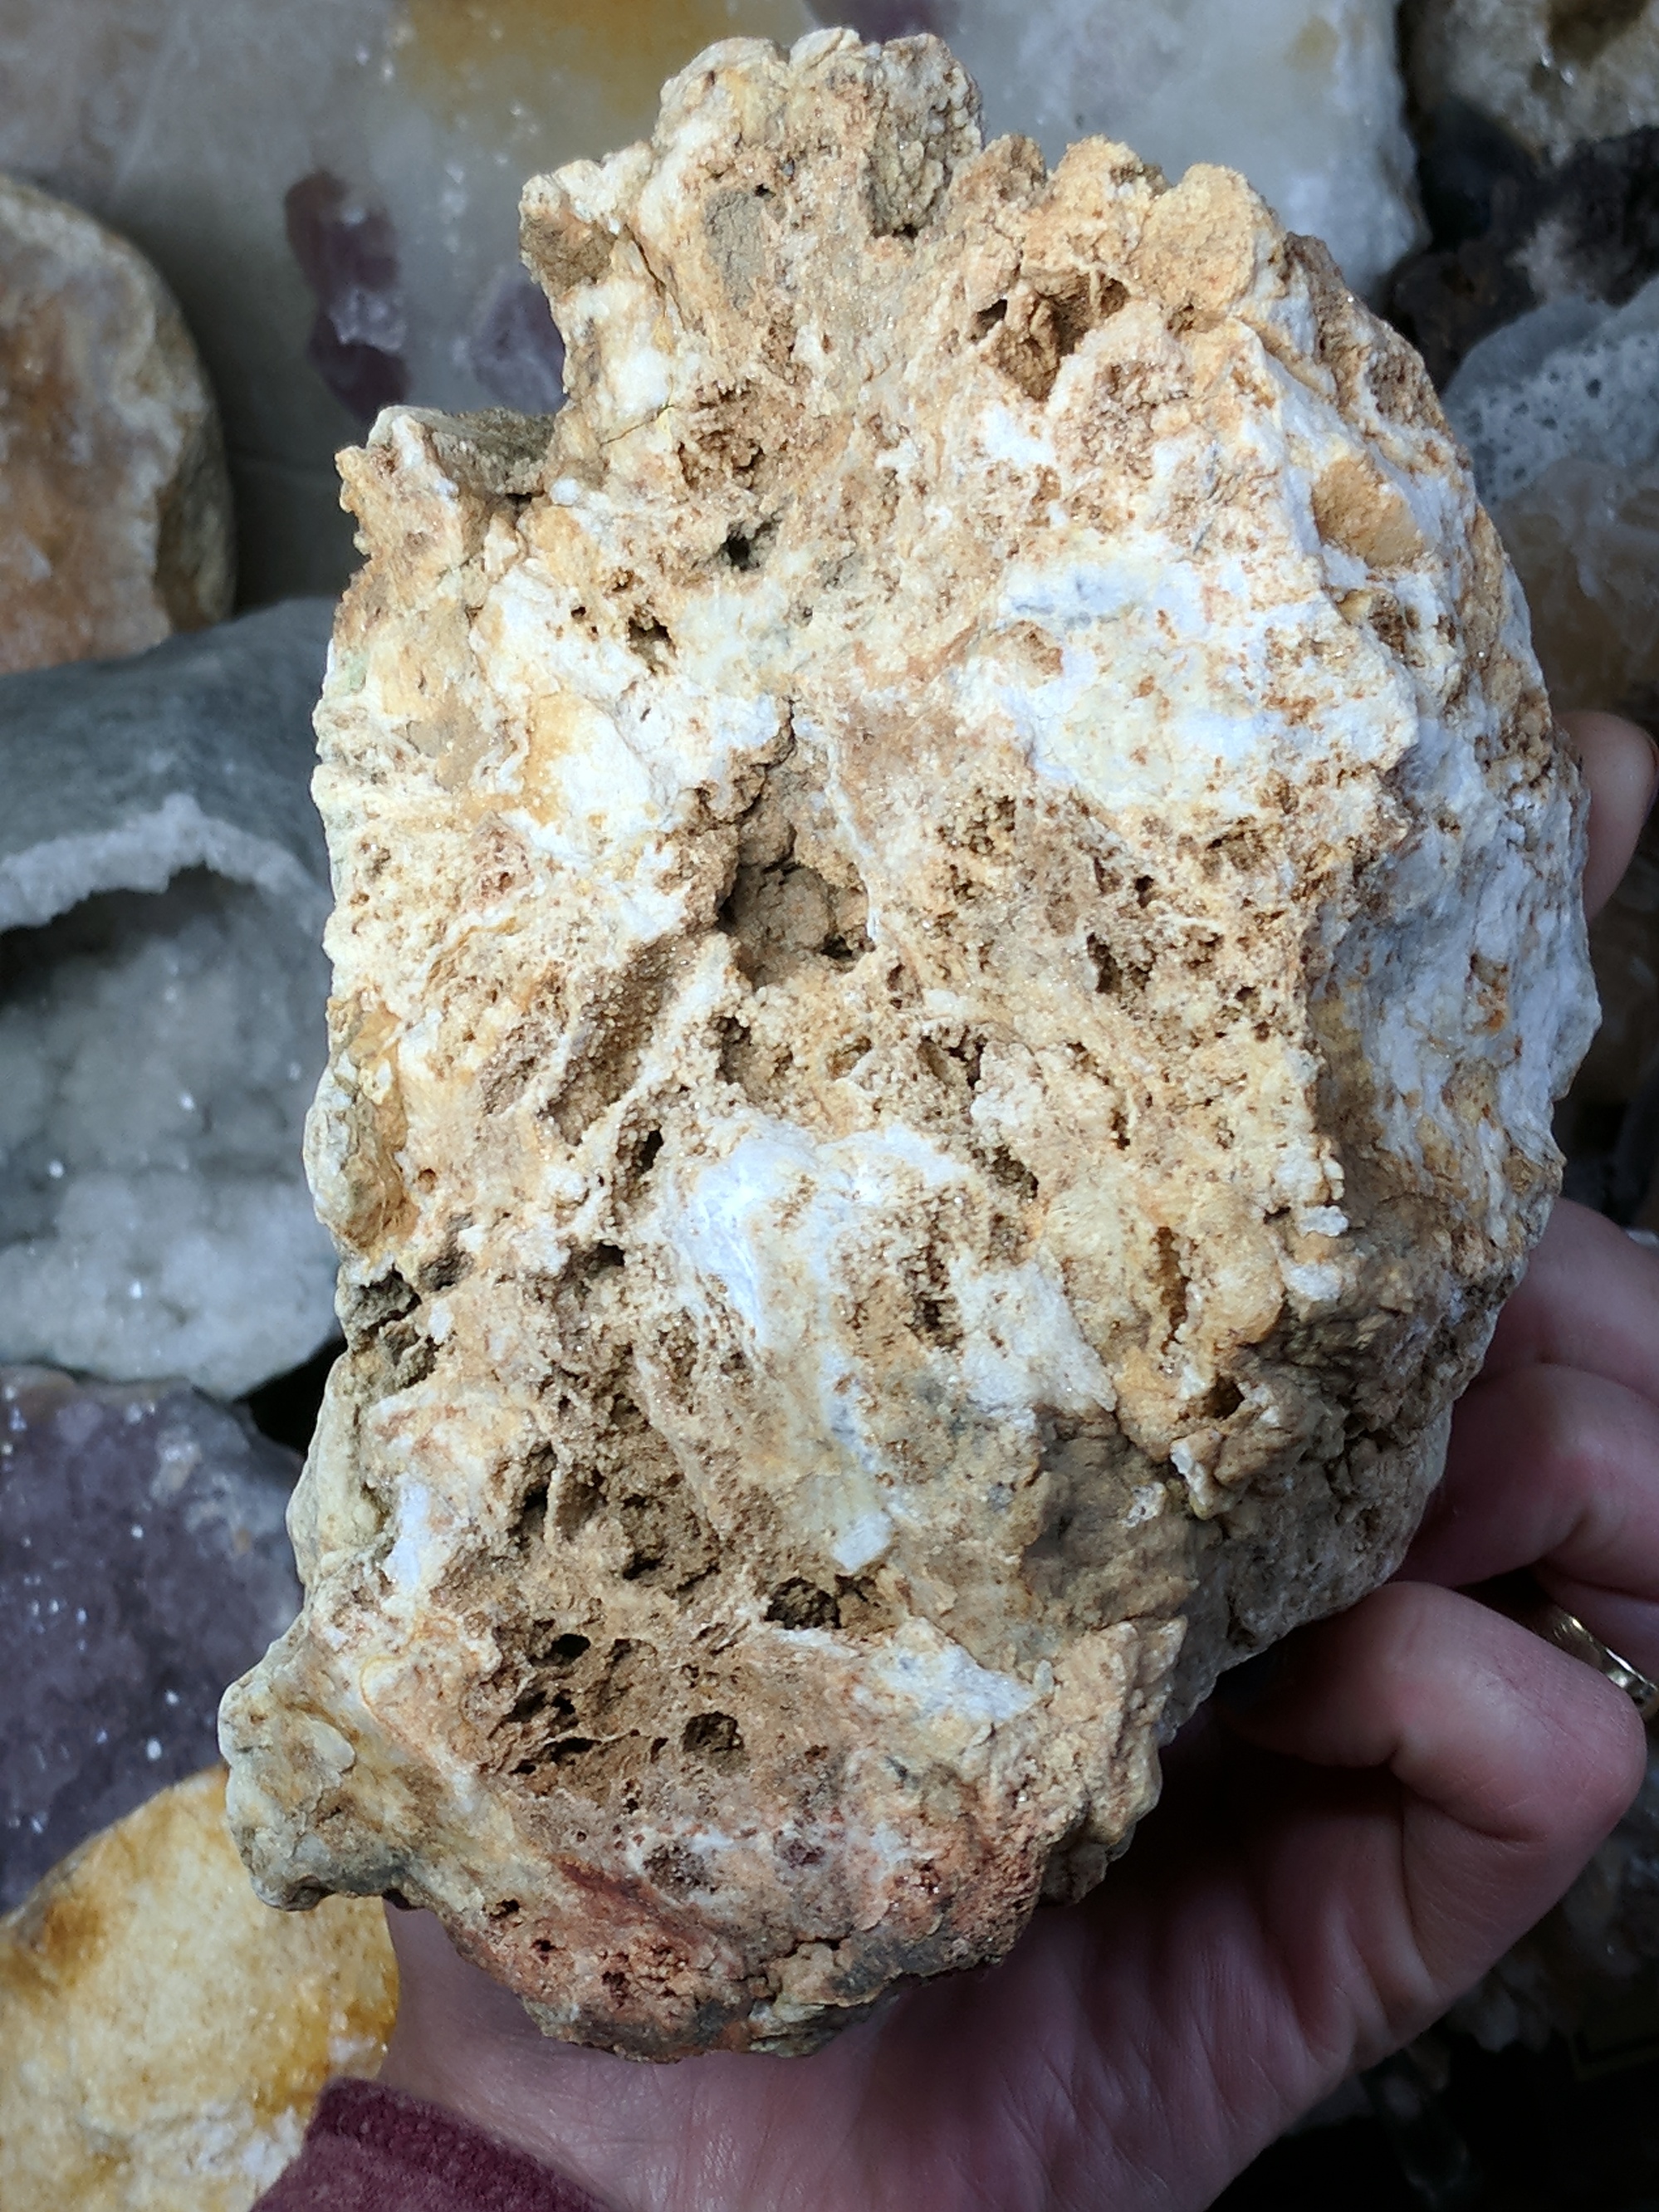 Identity Help : Geode or Nodule-What Is This Ugly Thing?Lol